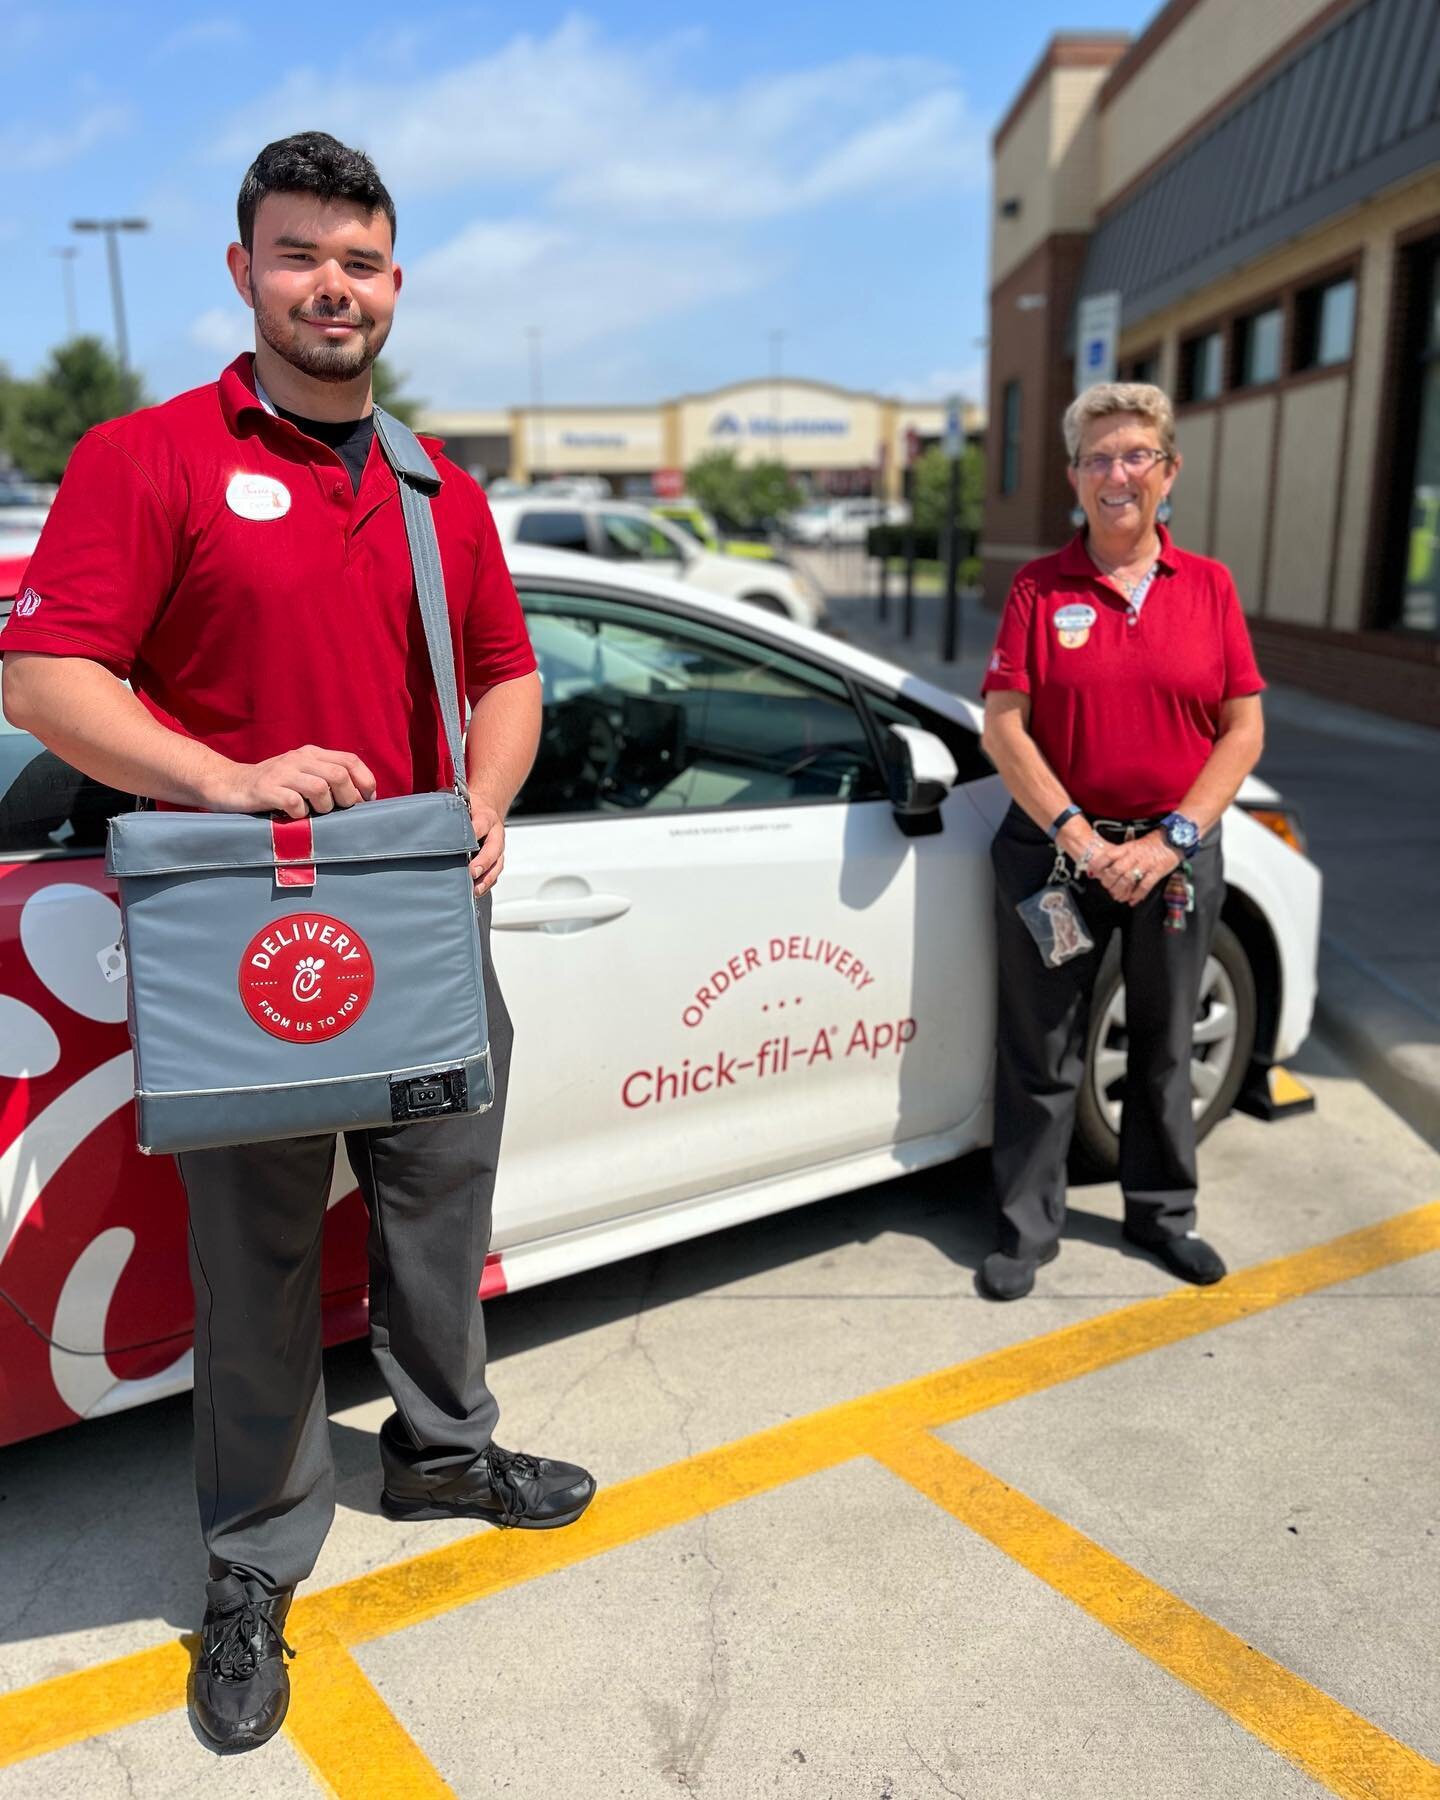 Let us bring Chick-fil-A to you. 

Order Chick-fil-A to be delivered to you on the Chick-fil-A App! 

We deliver Monday - Saturday from 8am-8pm 📲🚘